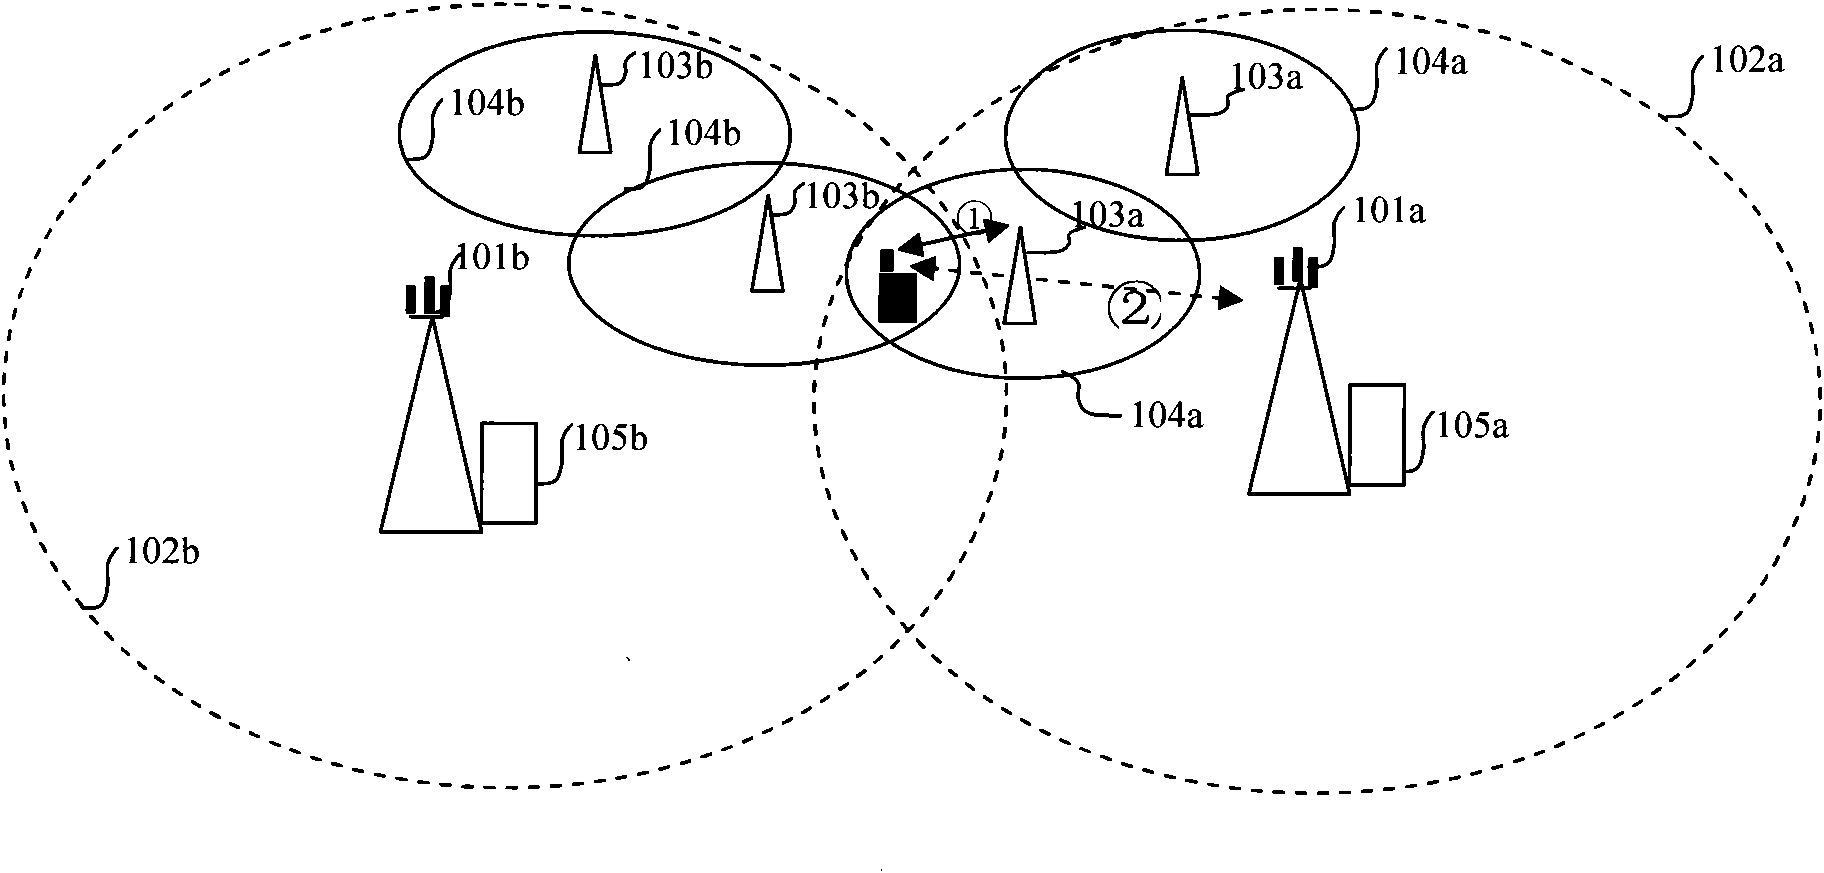 Method for switching terminal among heterogeneous hierarchical distributing type base stations